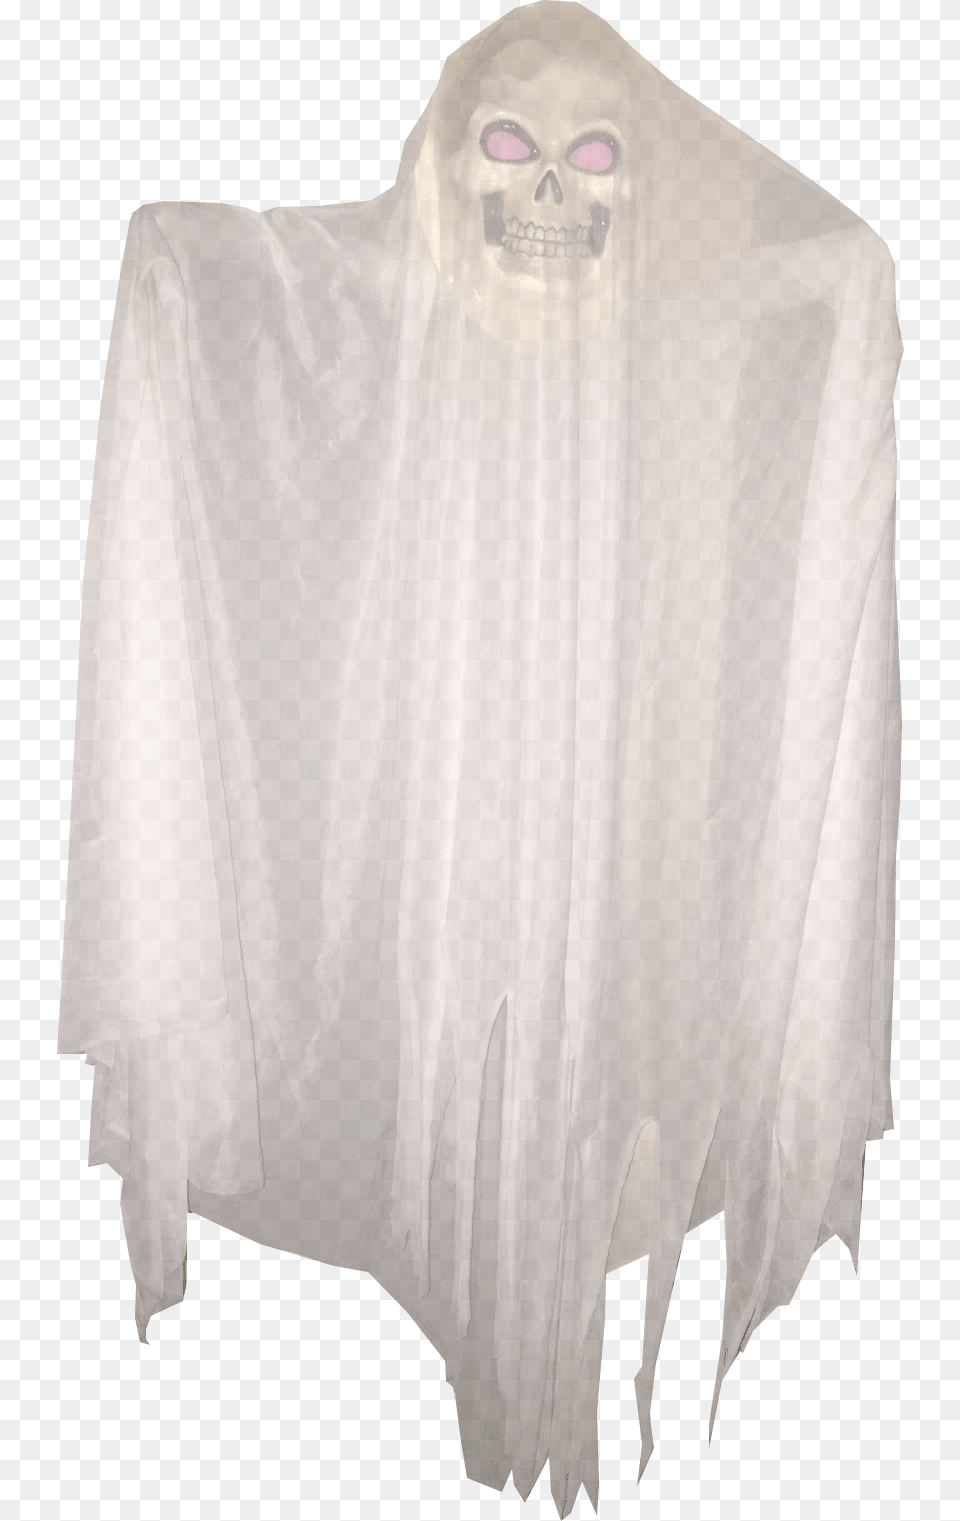 Skeleton Ghost Transparent Image Halloween Images Real Ghost Transparent Background, Fashion, Blouse, Cape, Clothing Png